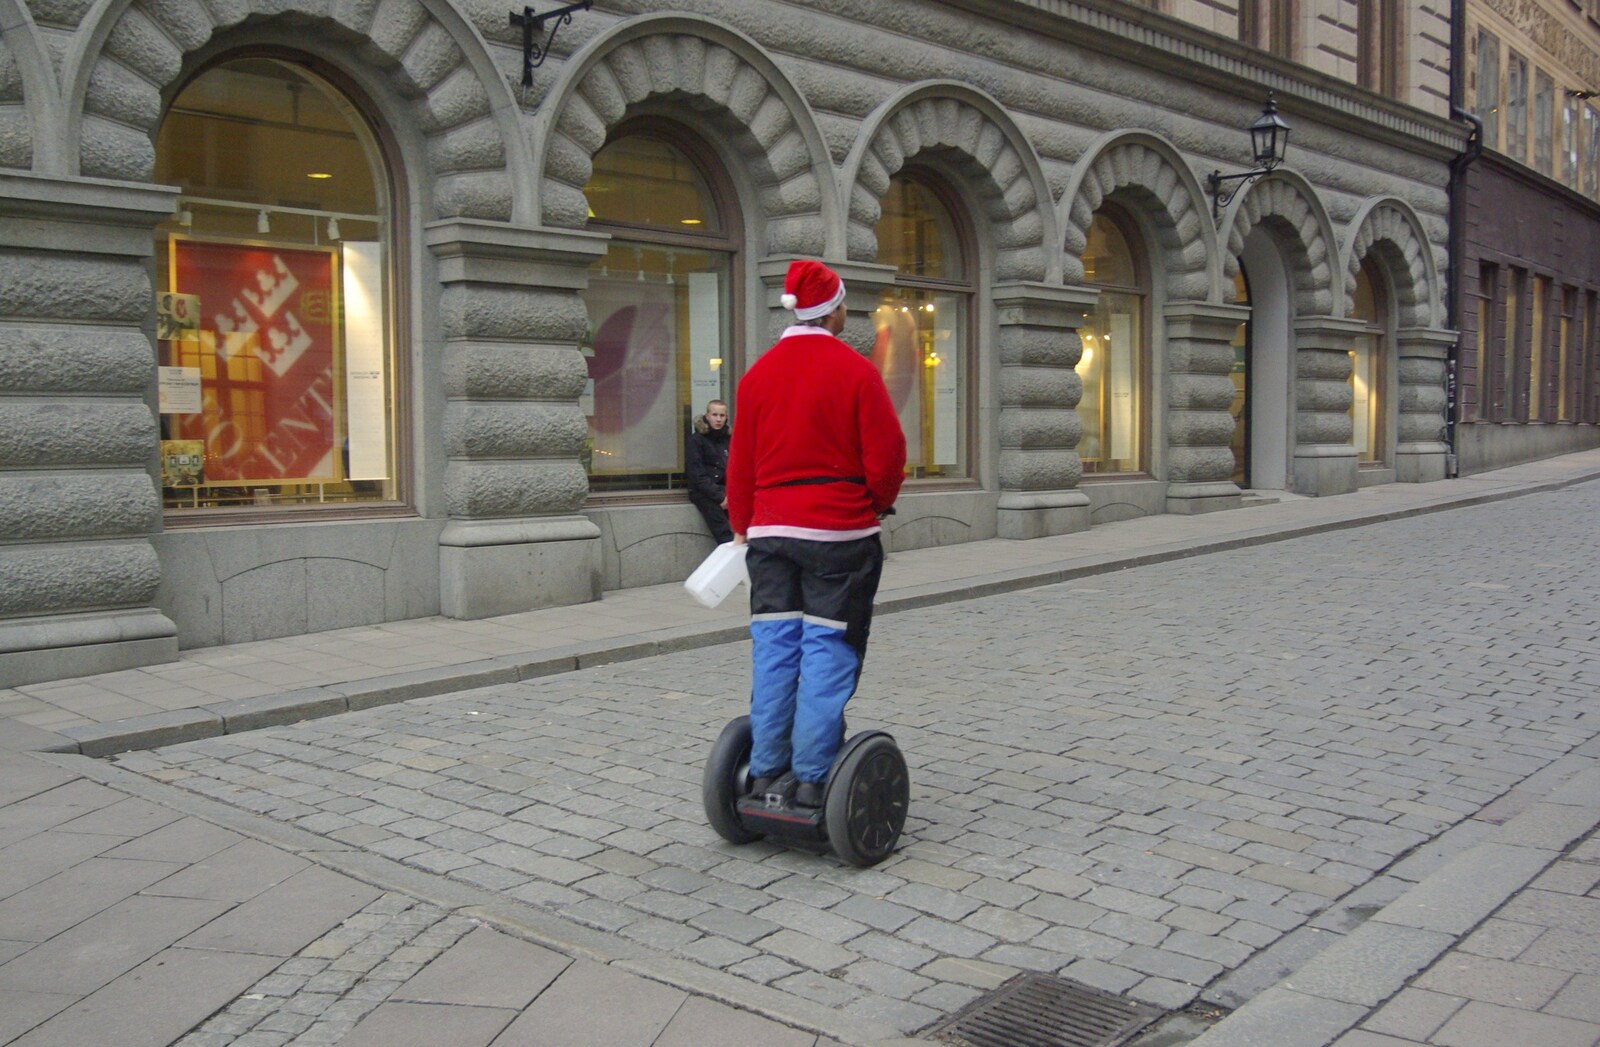 A Santa on a Segway from Gamla Stan, Stockholm, Sweden - 15th December 2007